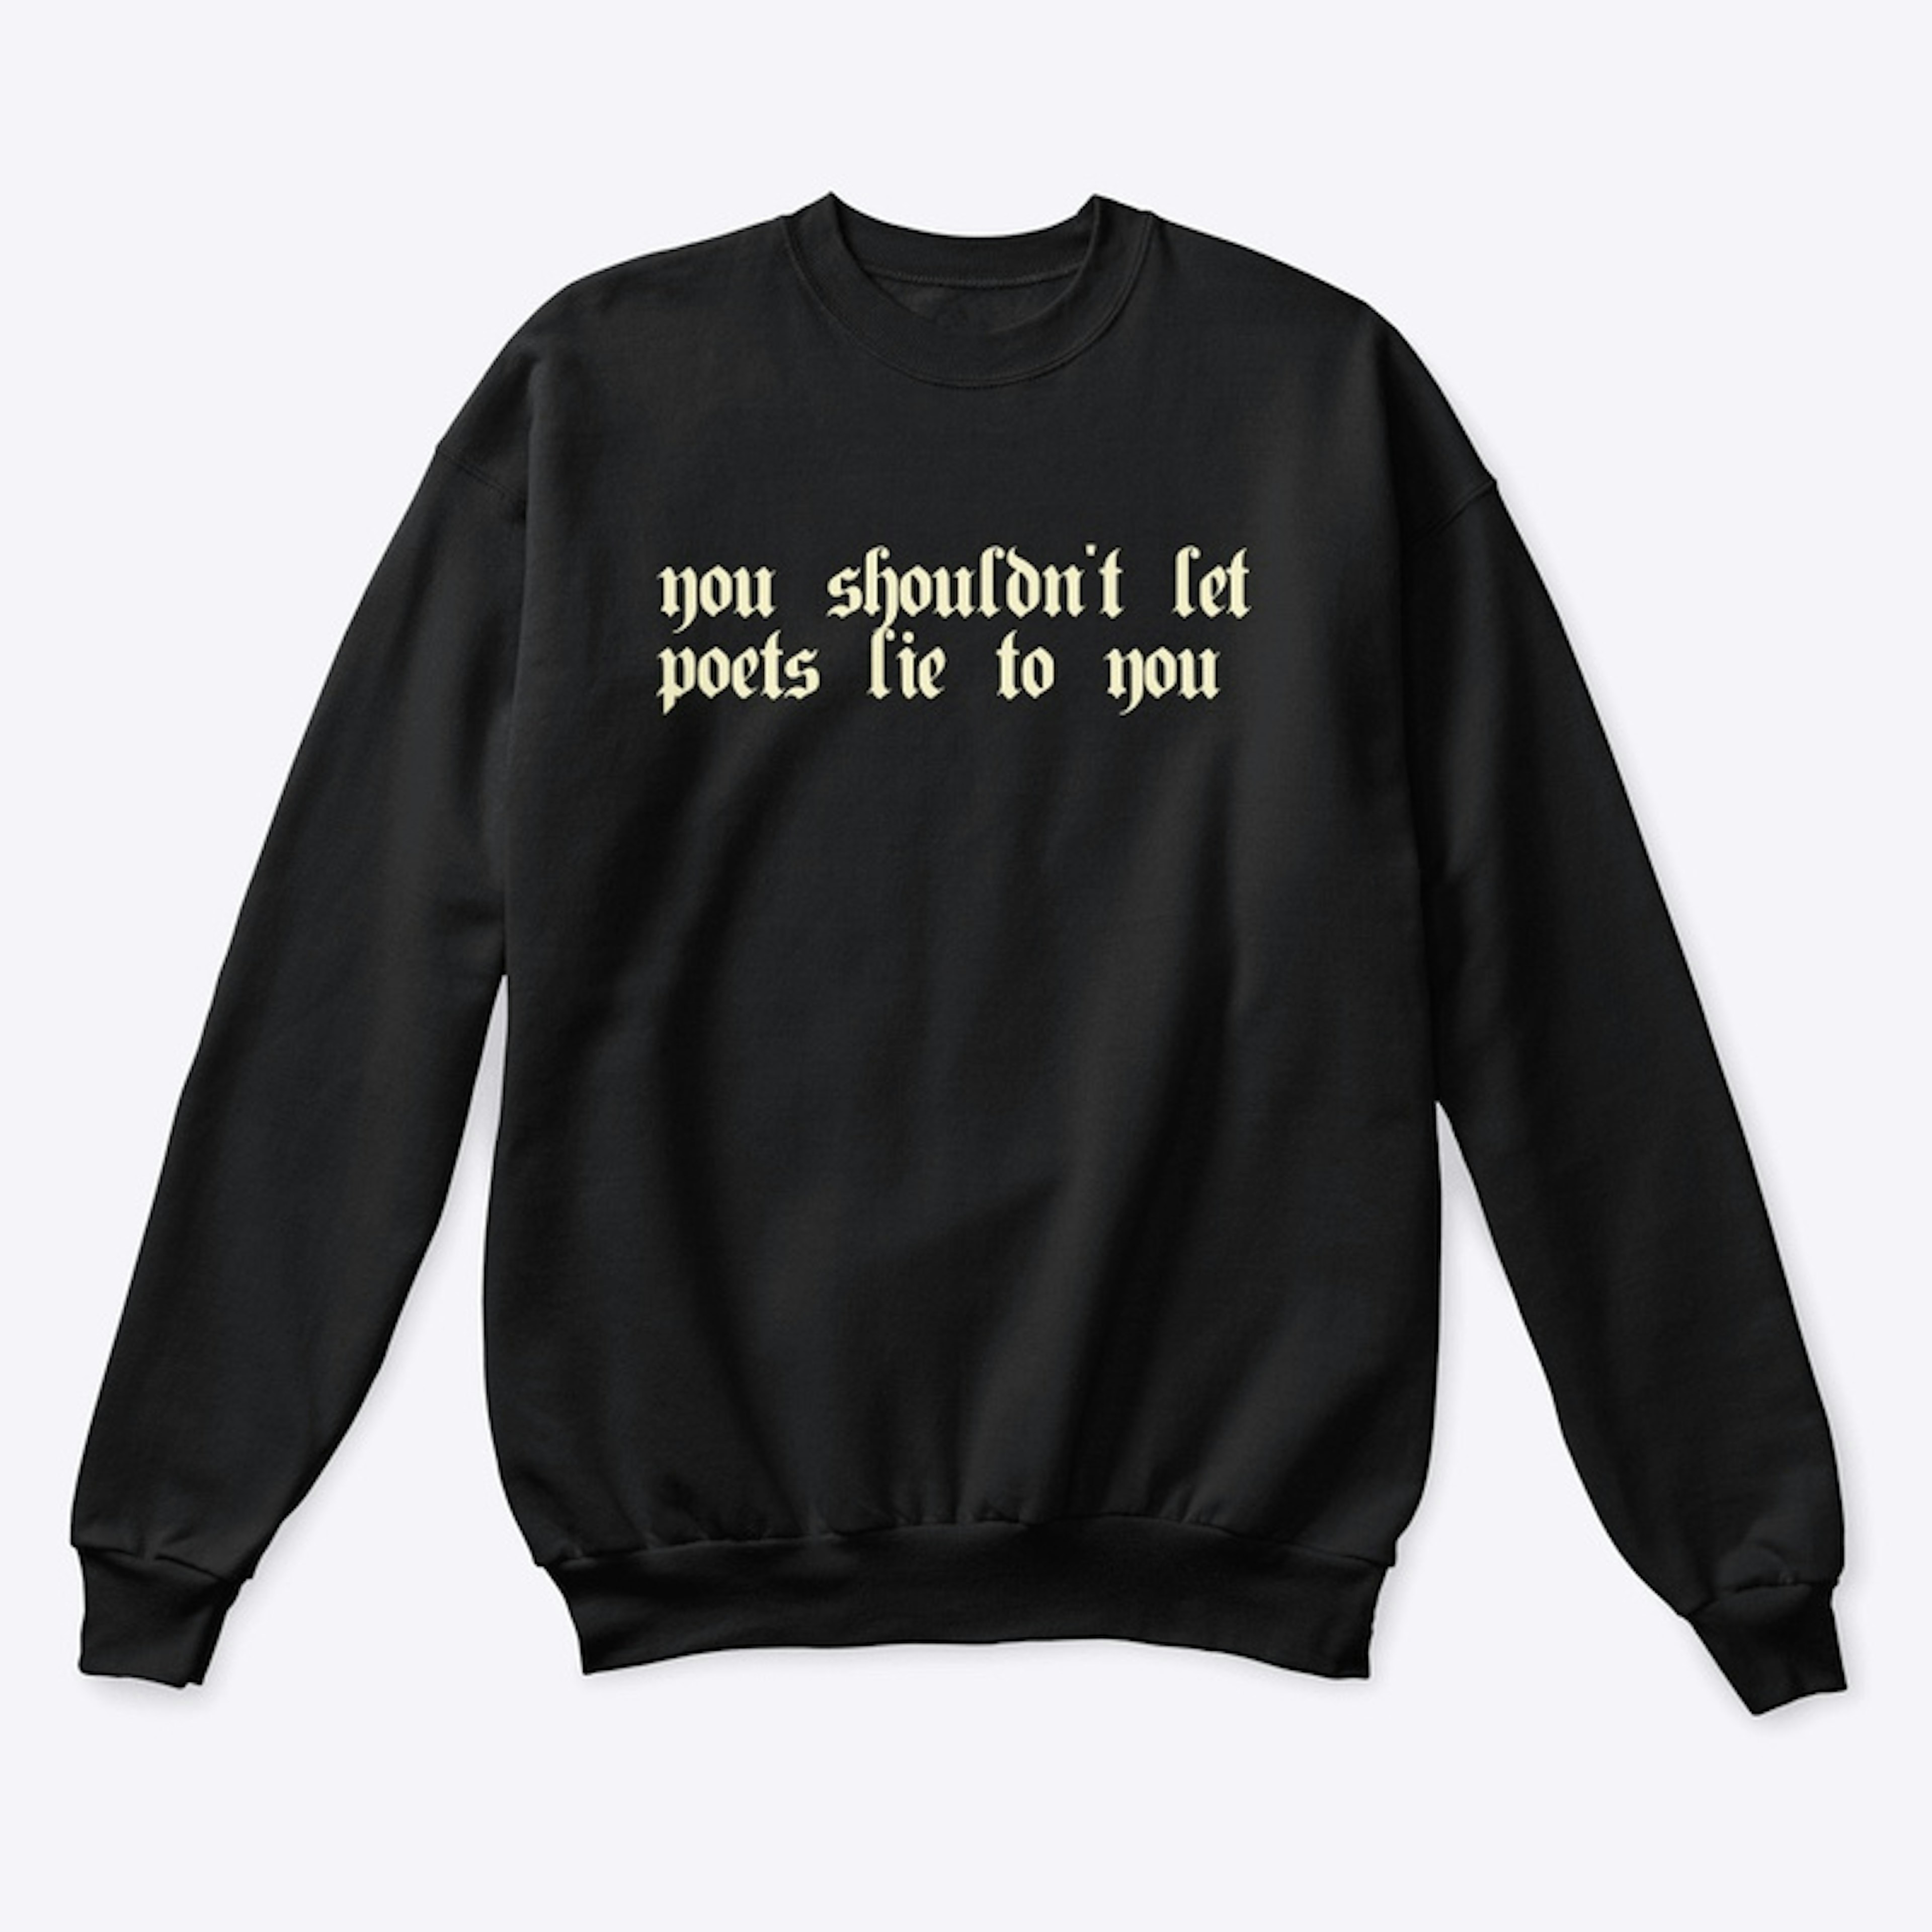 You Shouldn't Let Poets Lie to You